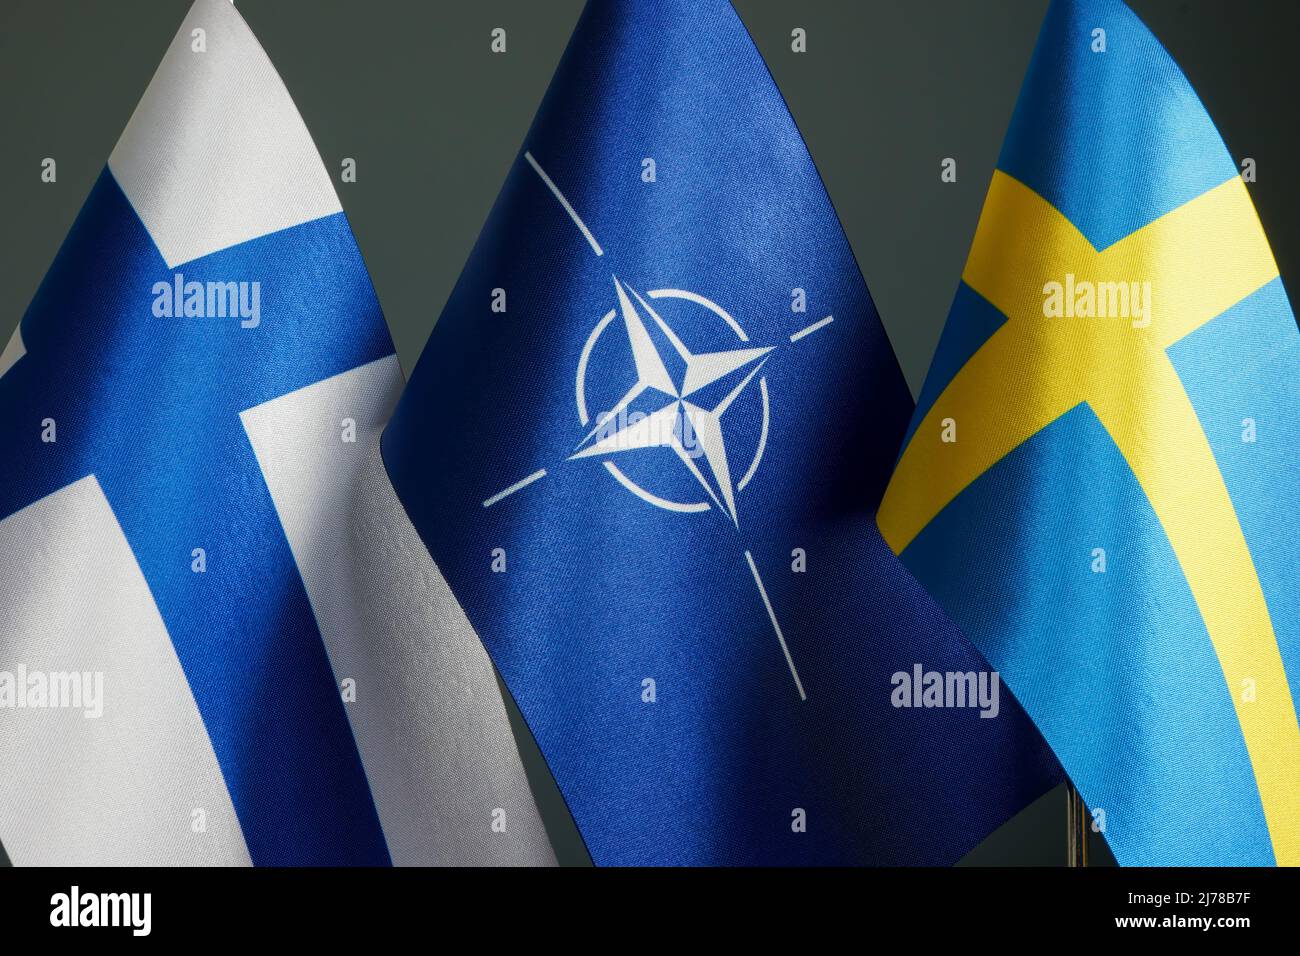 KYIV, UKRAINE - May 7, 2022. Flags of Sweden, Finland and NATO. Stock Photo